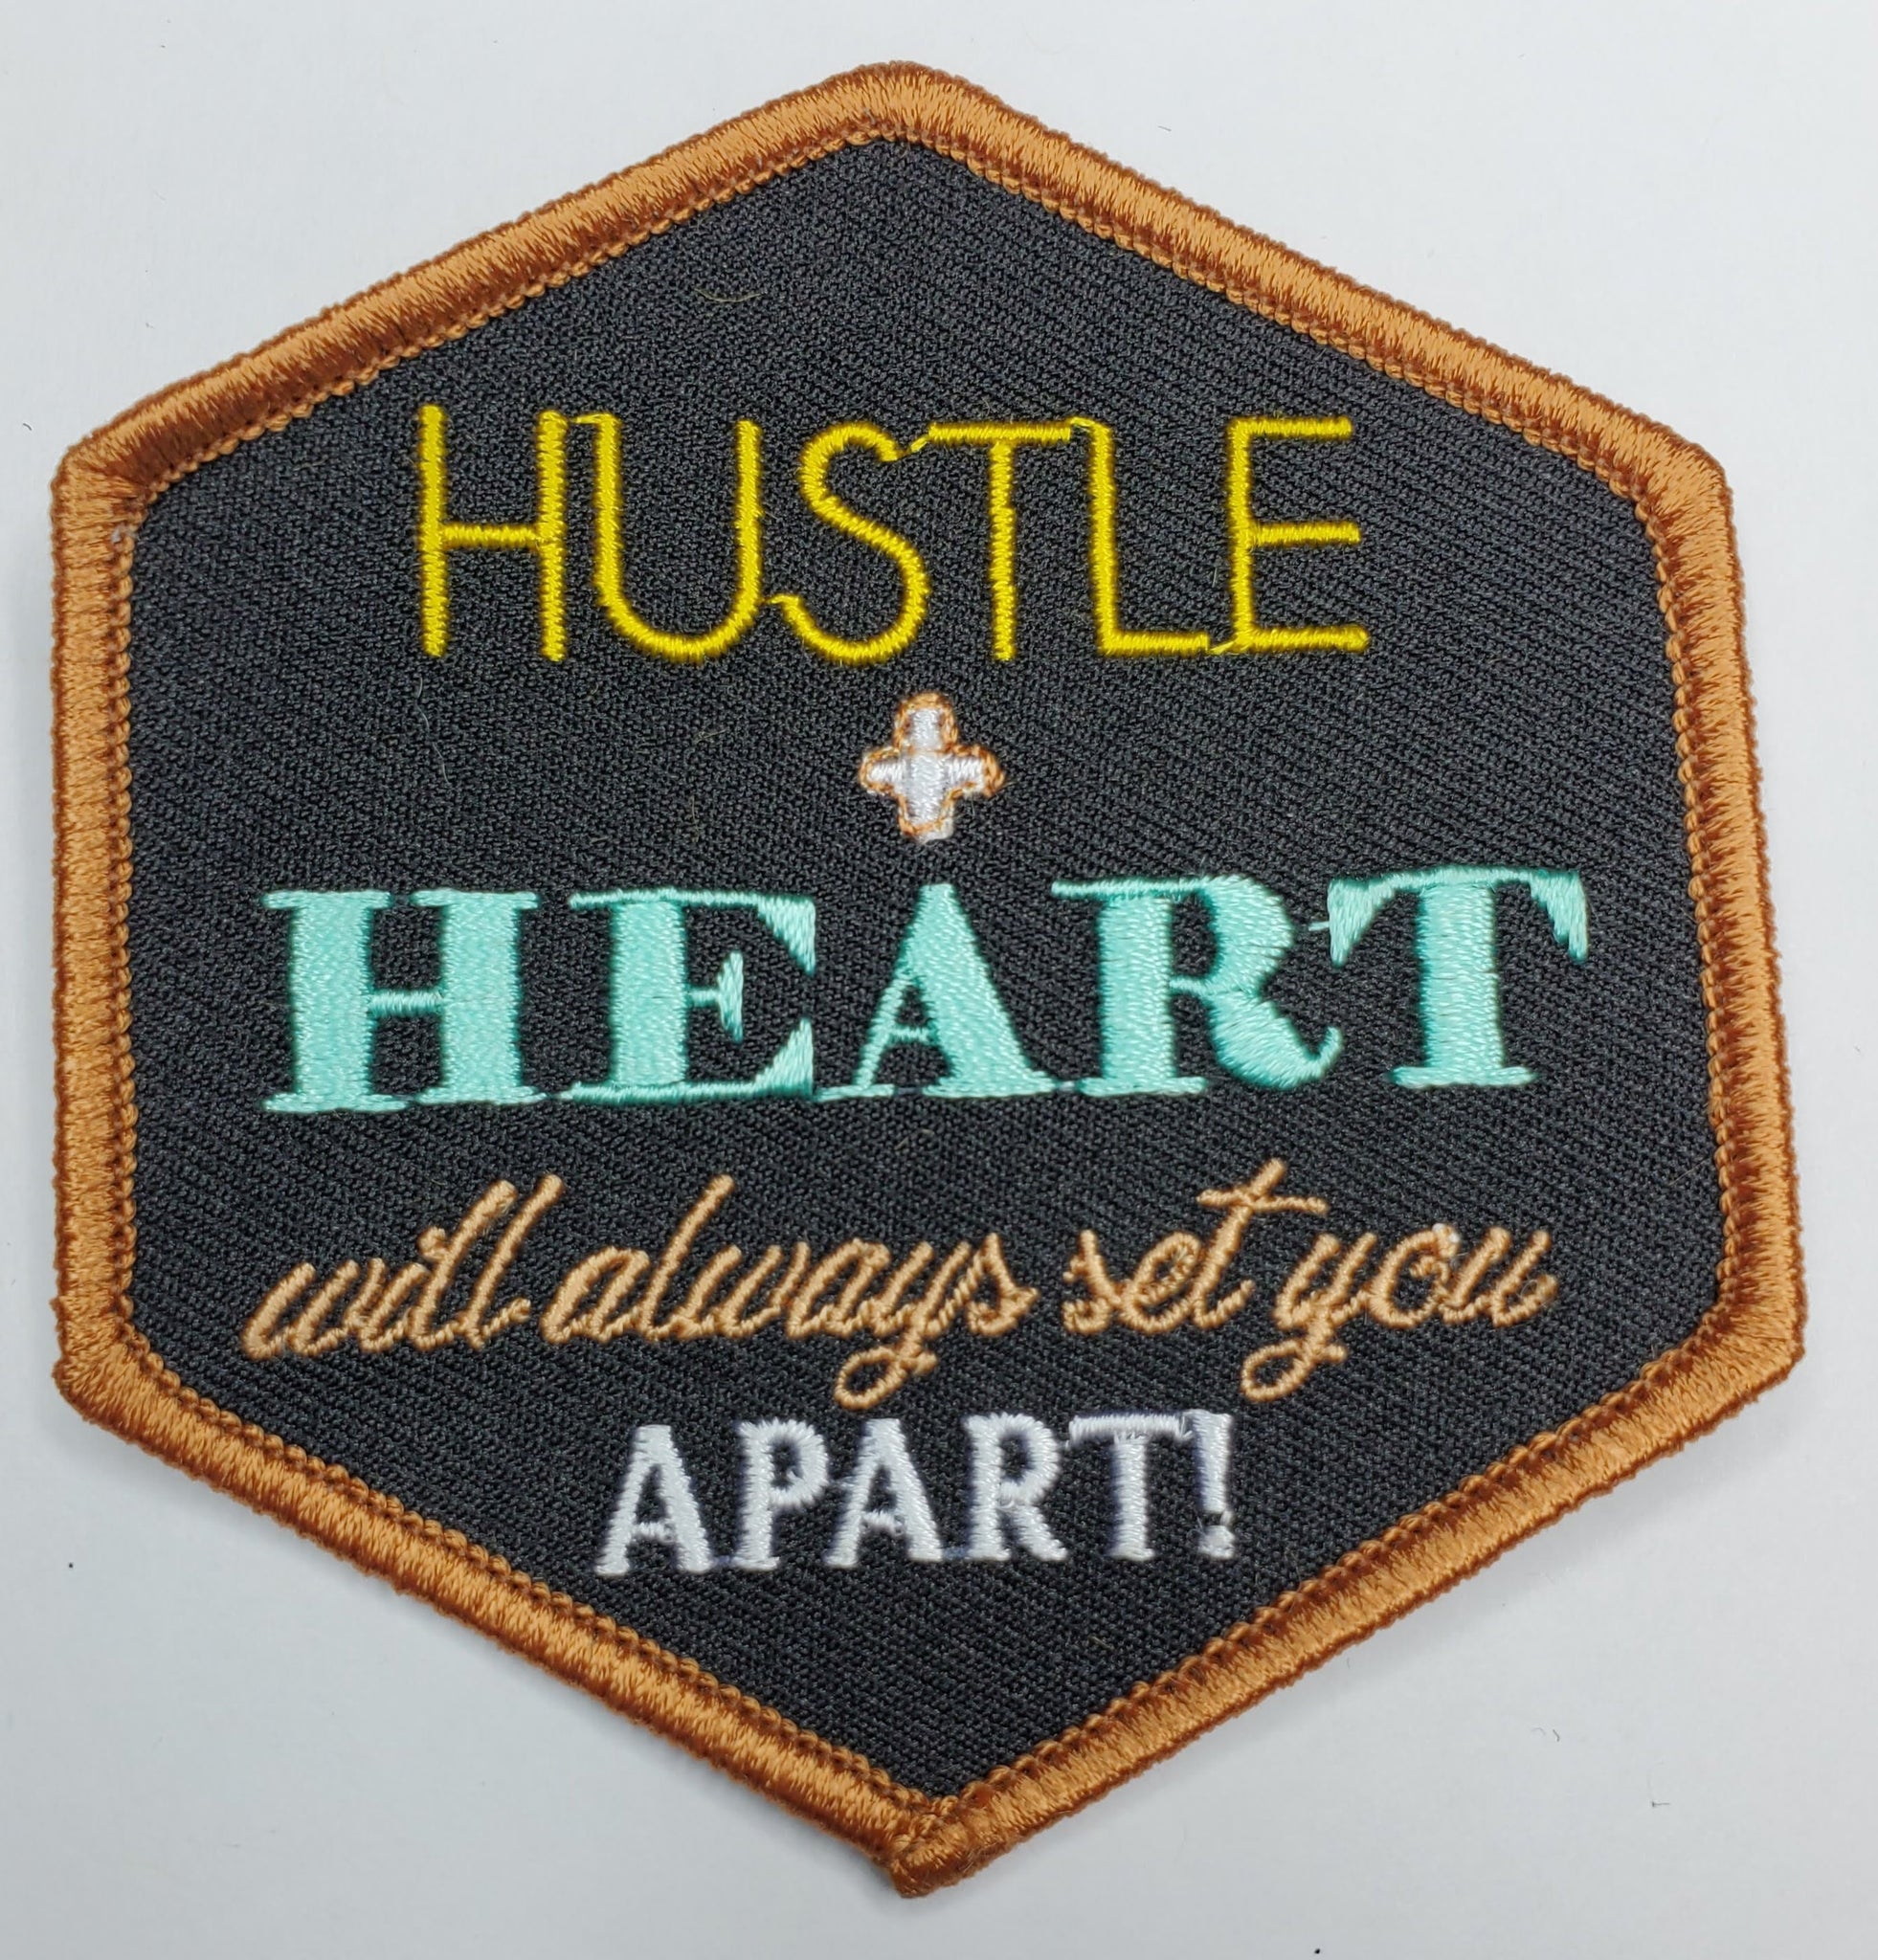 Embroidered Entrepreneur Patch, Iron-on "Hustle + Heart" Badge, Cool Appliques and Patches, Size 3"x3"